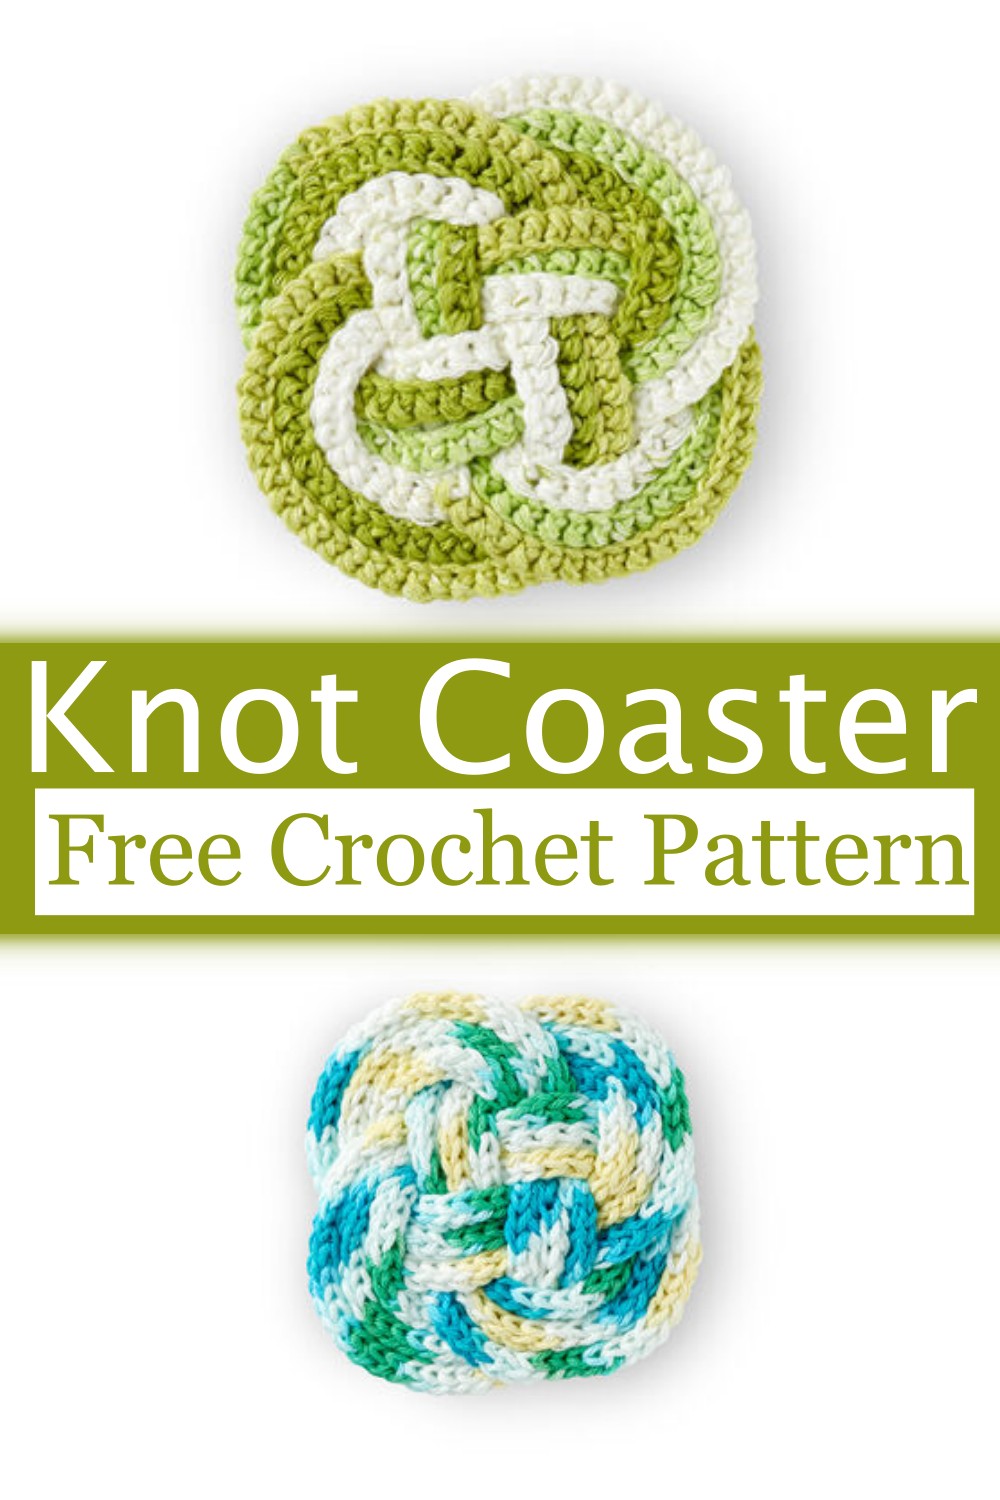 How To Crochet Coaster With Knot Pattern